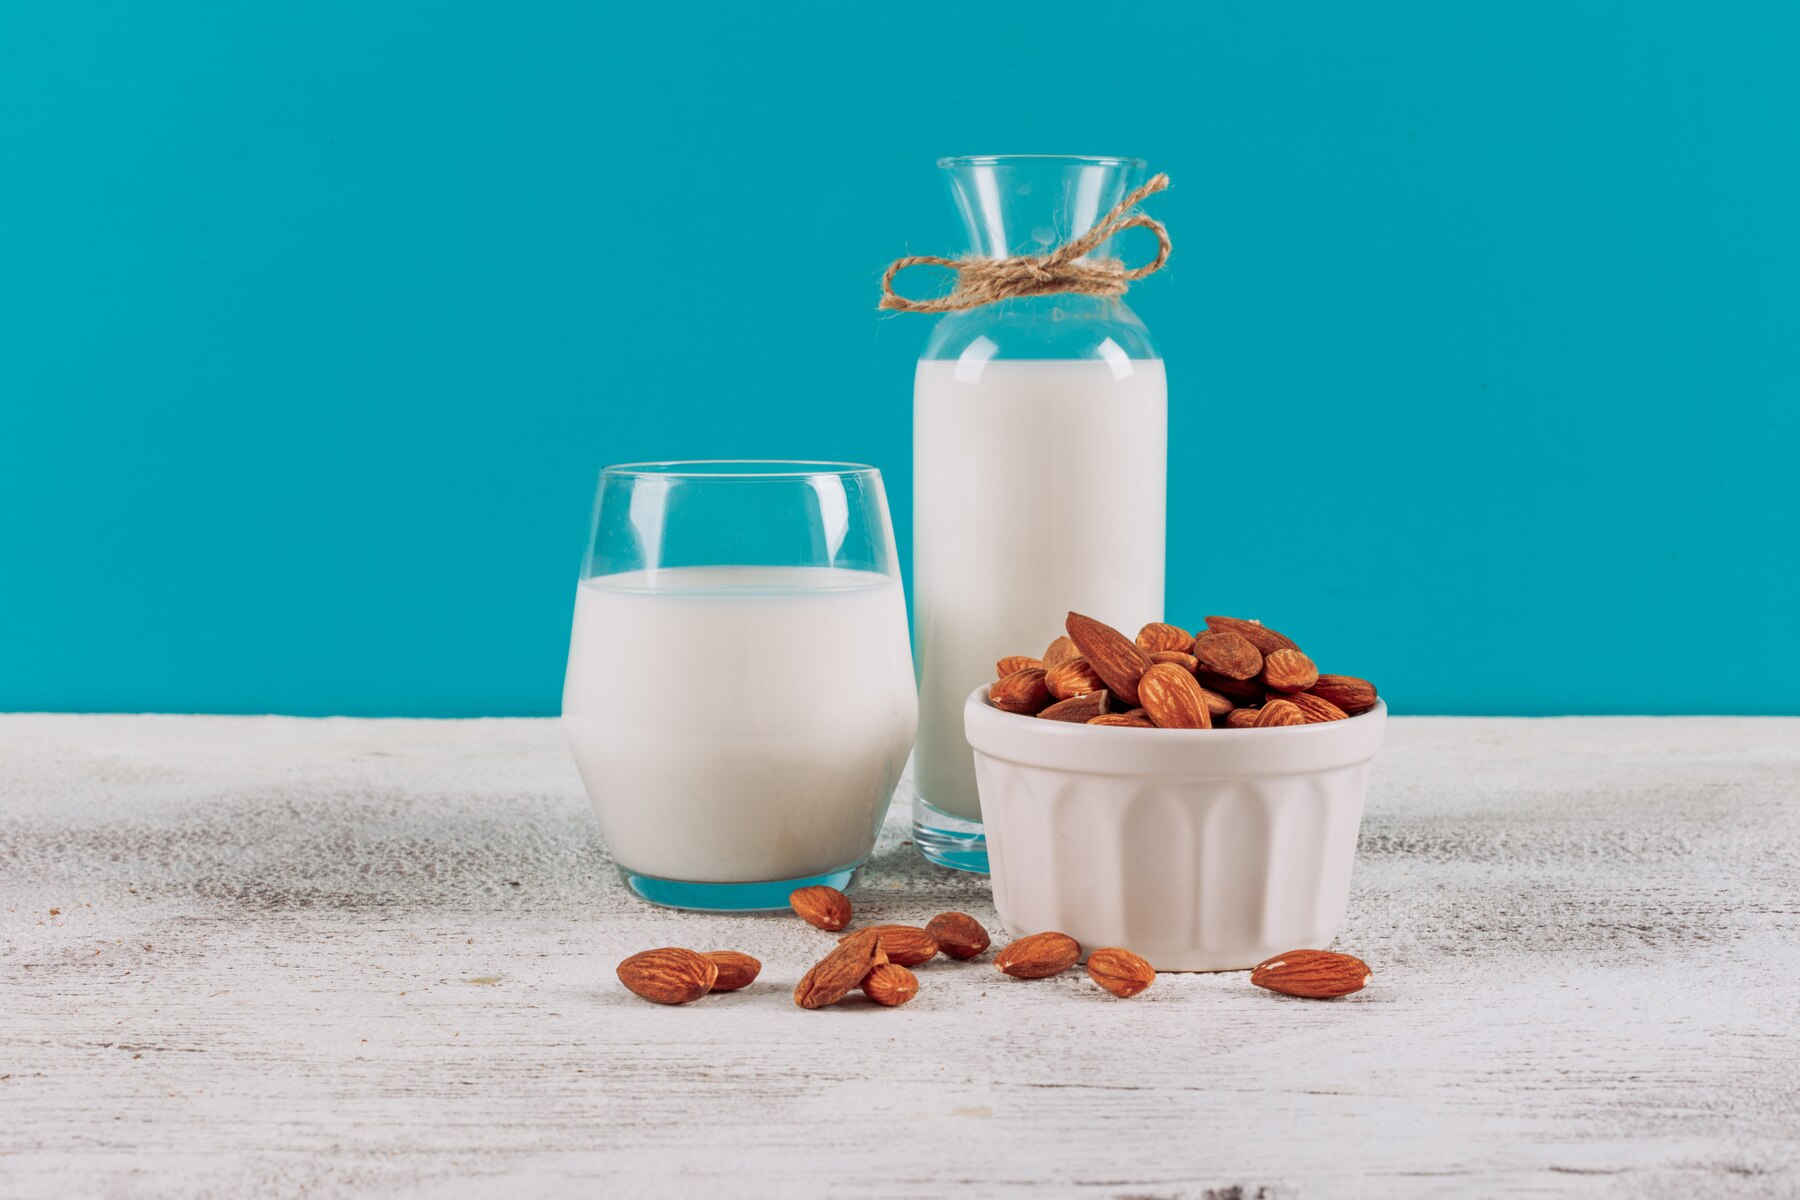 bottle-of-milk-with-glass-of-milk-and-bowl-of-almonds-side-view-on-a-white-wooden-and-blue-background_176474-4591.jpg